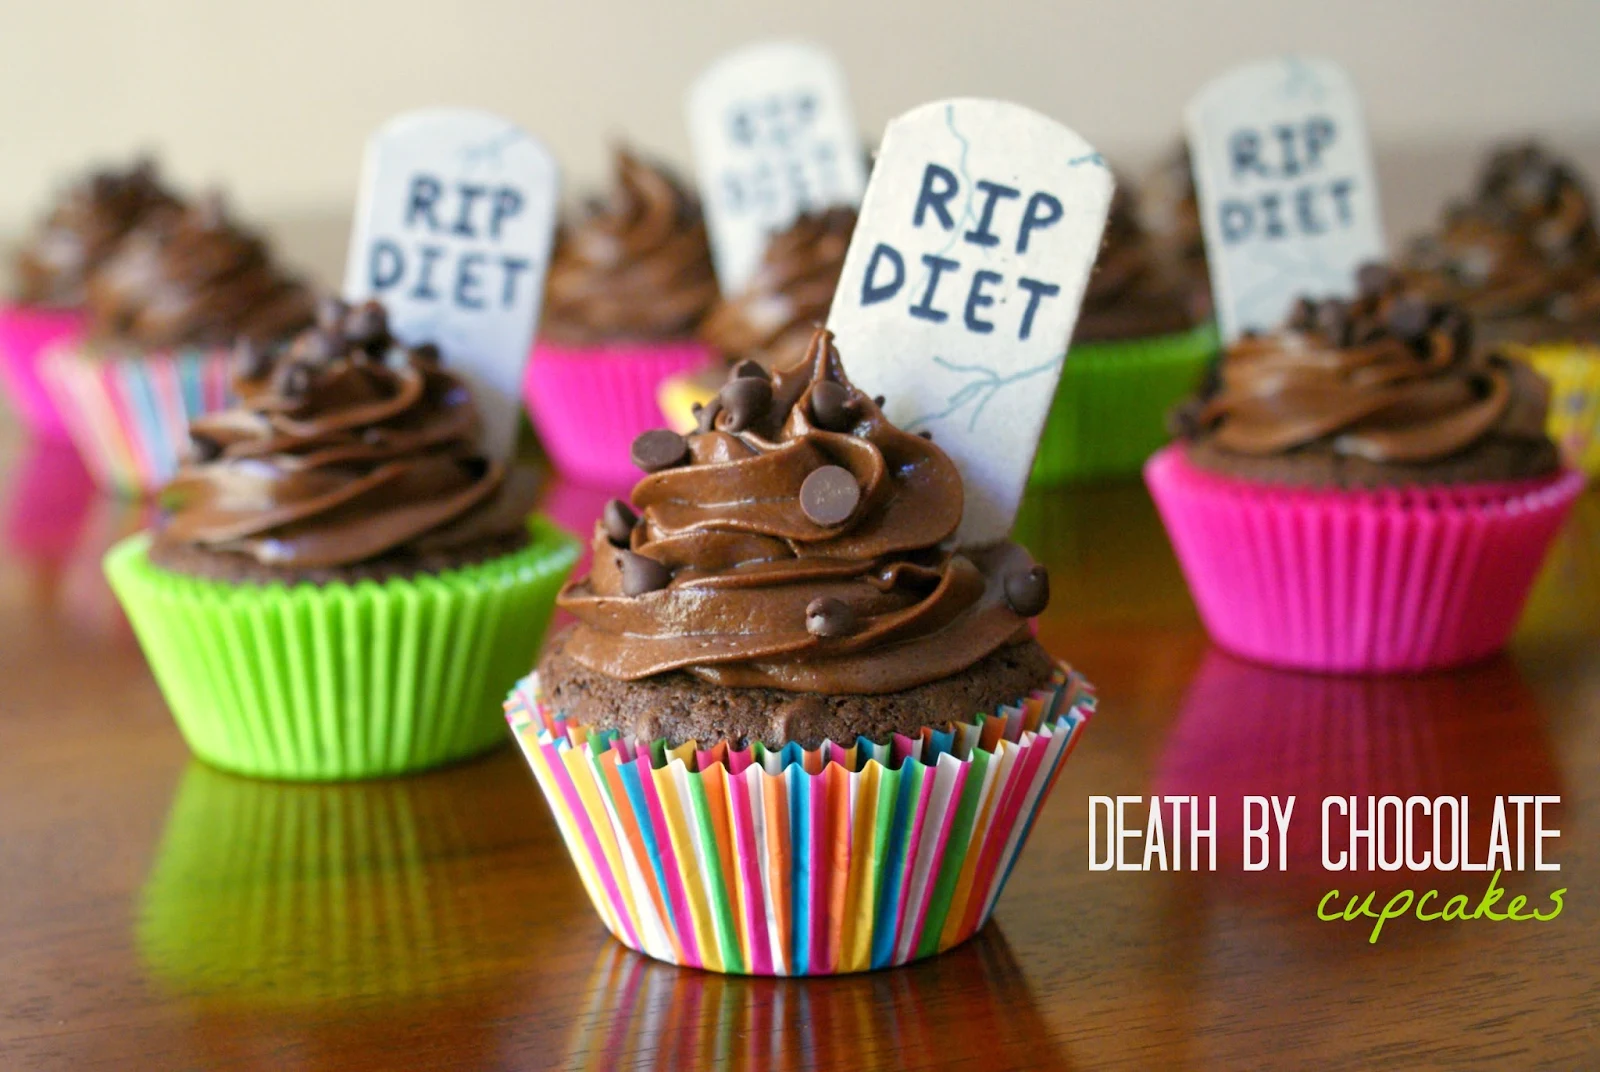 Death by Chocolate Cupcakes with a decadent Chocolate Cream Cheese Frosting